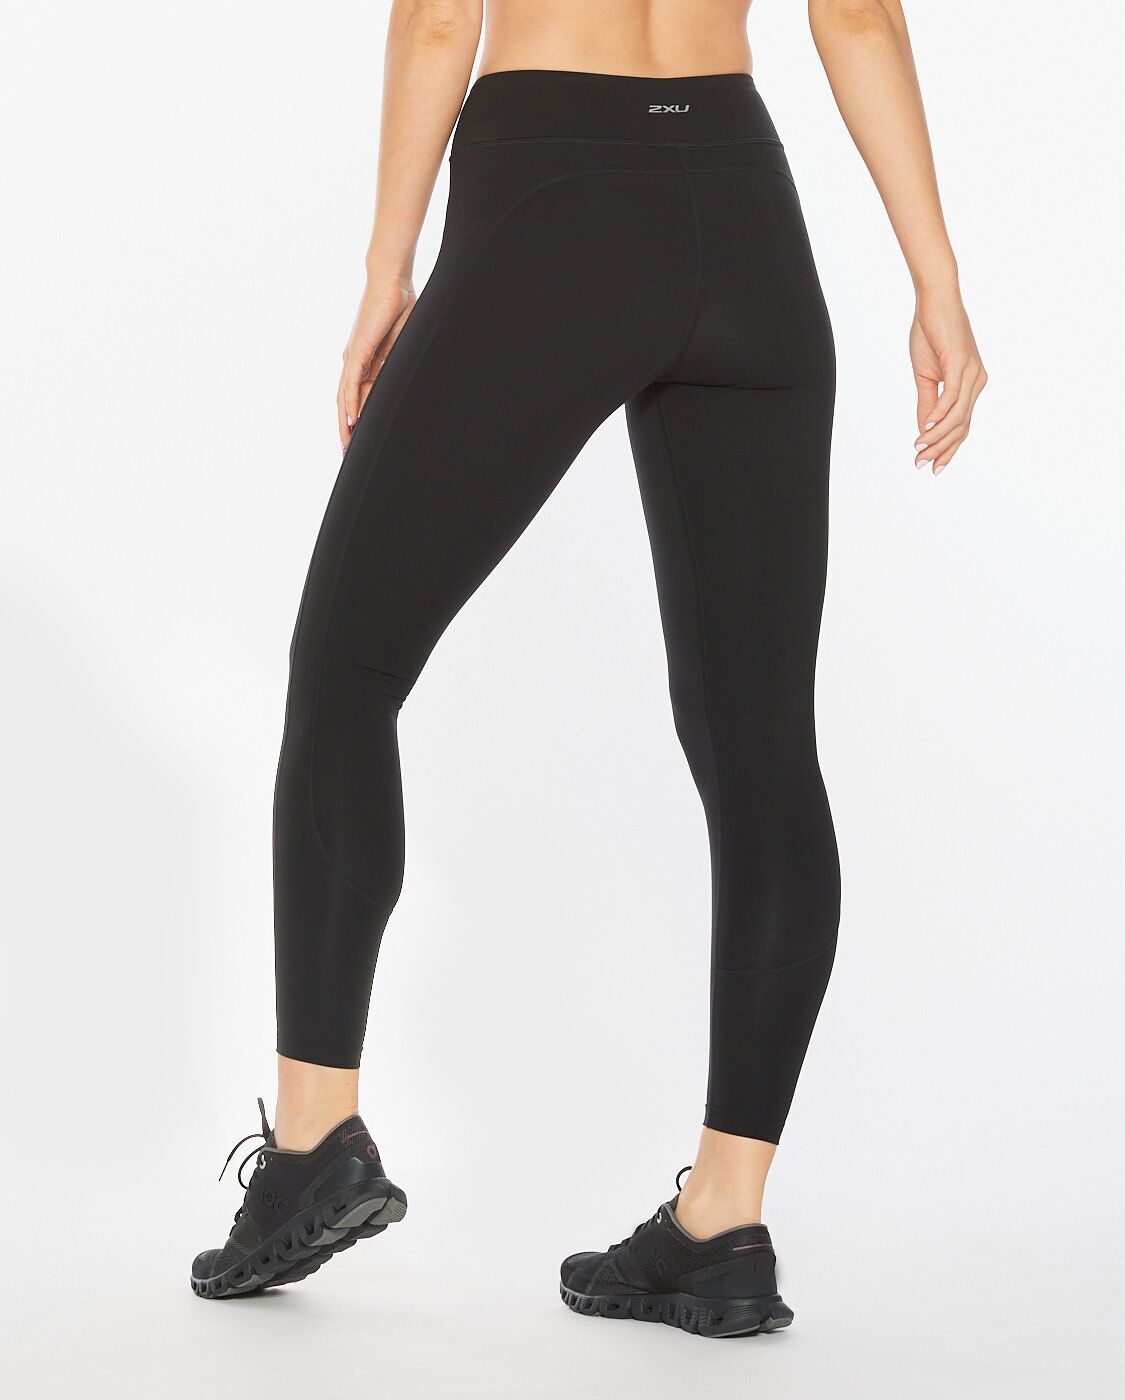 2XU South Africa - Womens Form Mid-Rise Compression Tights - Black/Silver